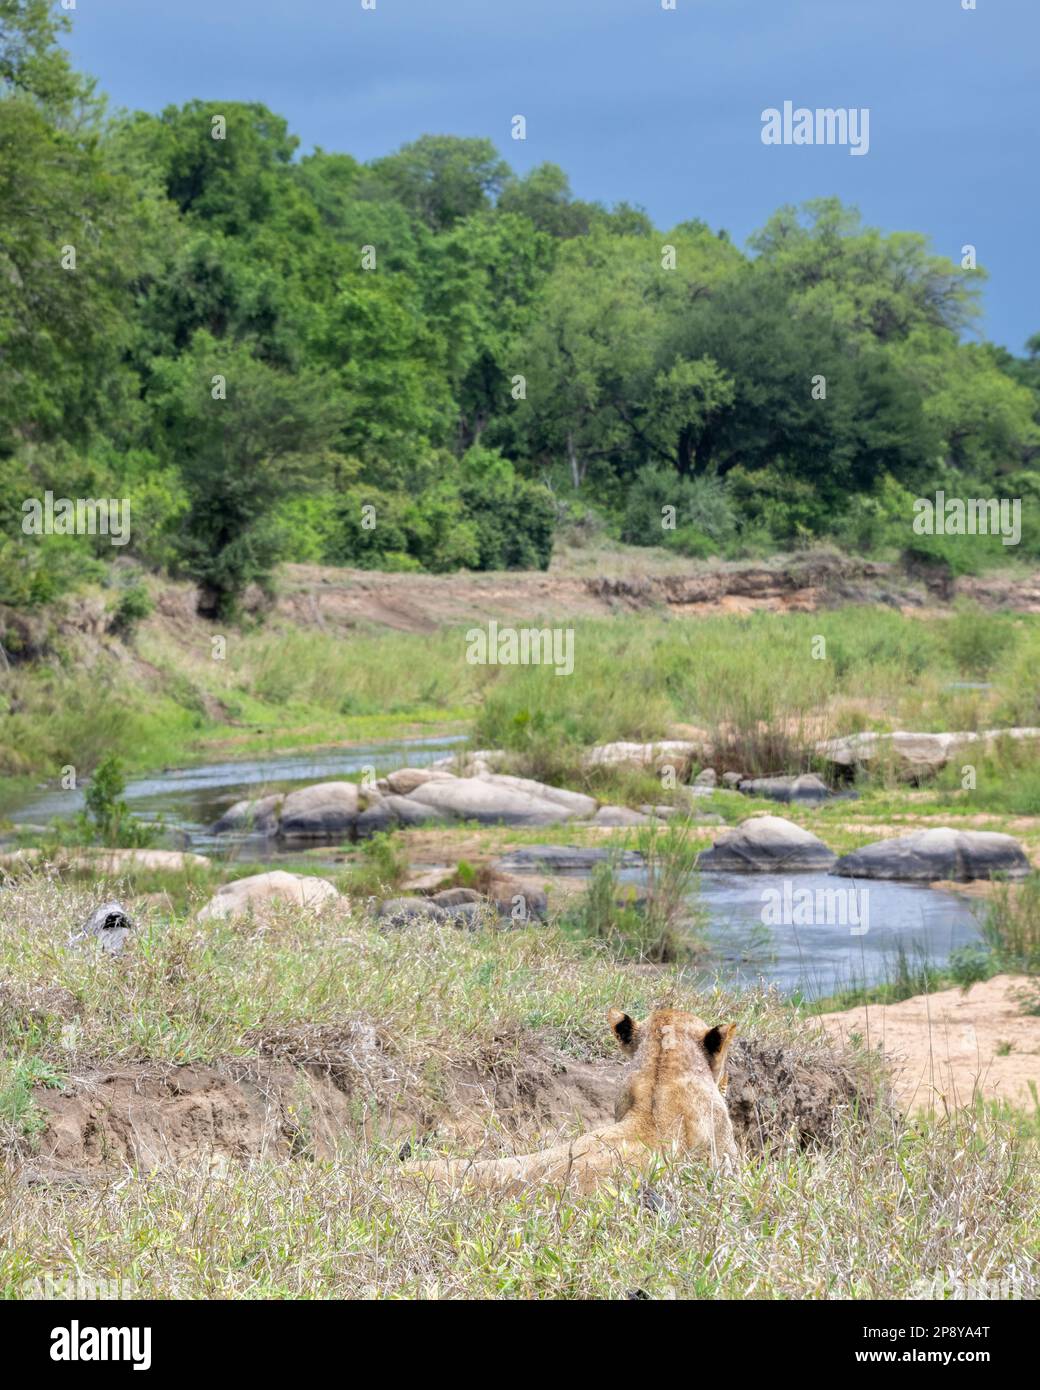 Lone Lioness staring out across the Sand River, Sabi Sands Stock Photo